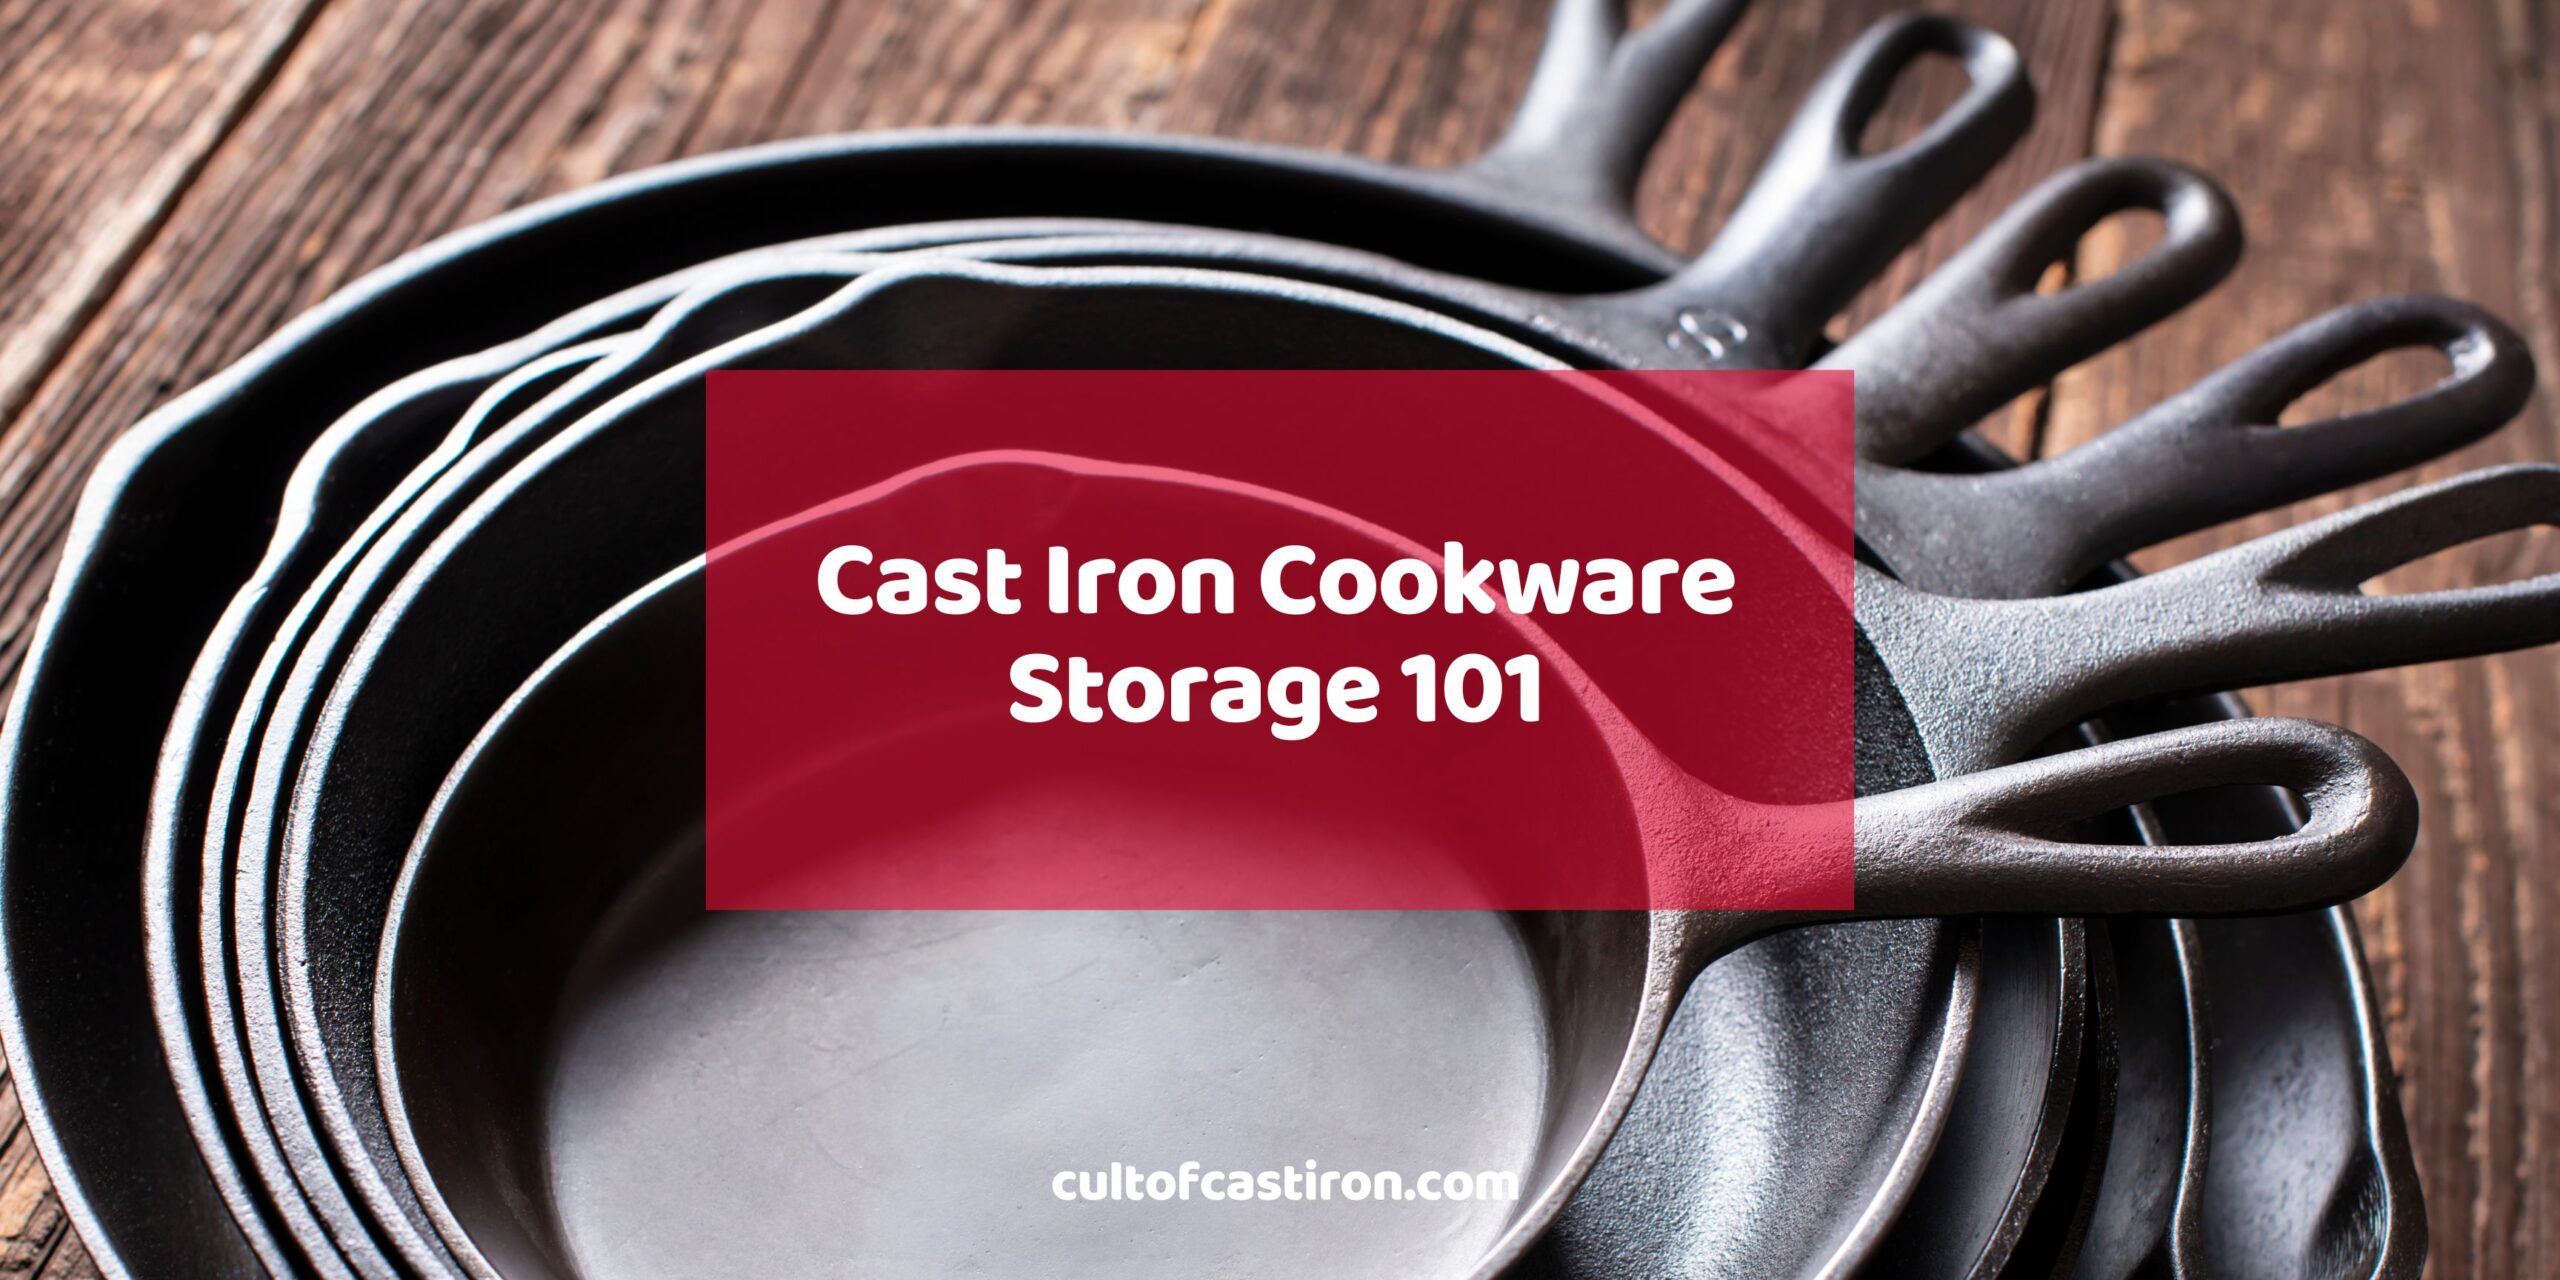 How To Store A Cast Iron Skillet: 8 Best Tips - Anita's Housekeeping